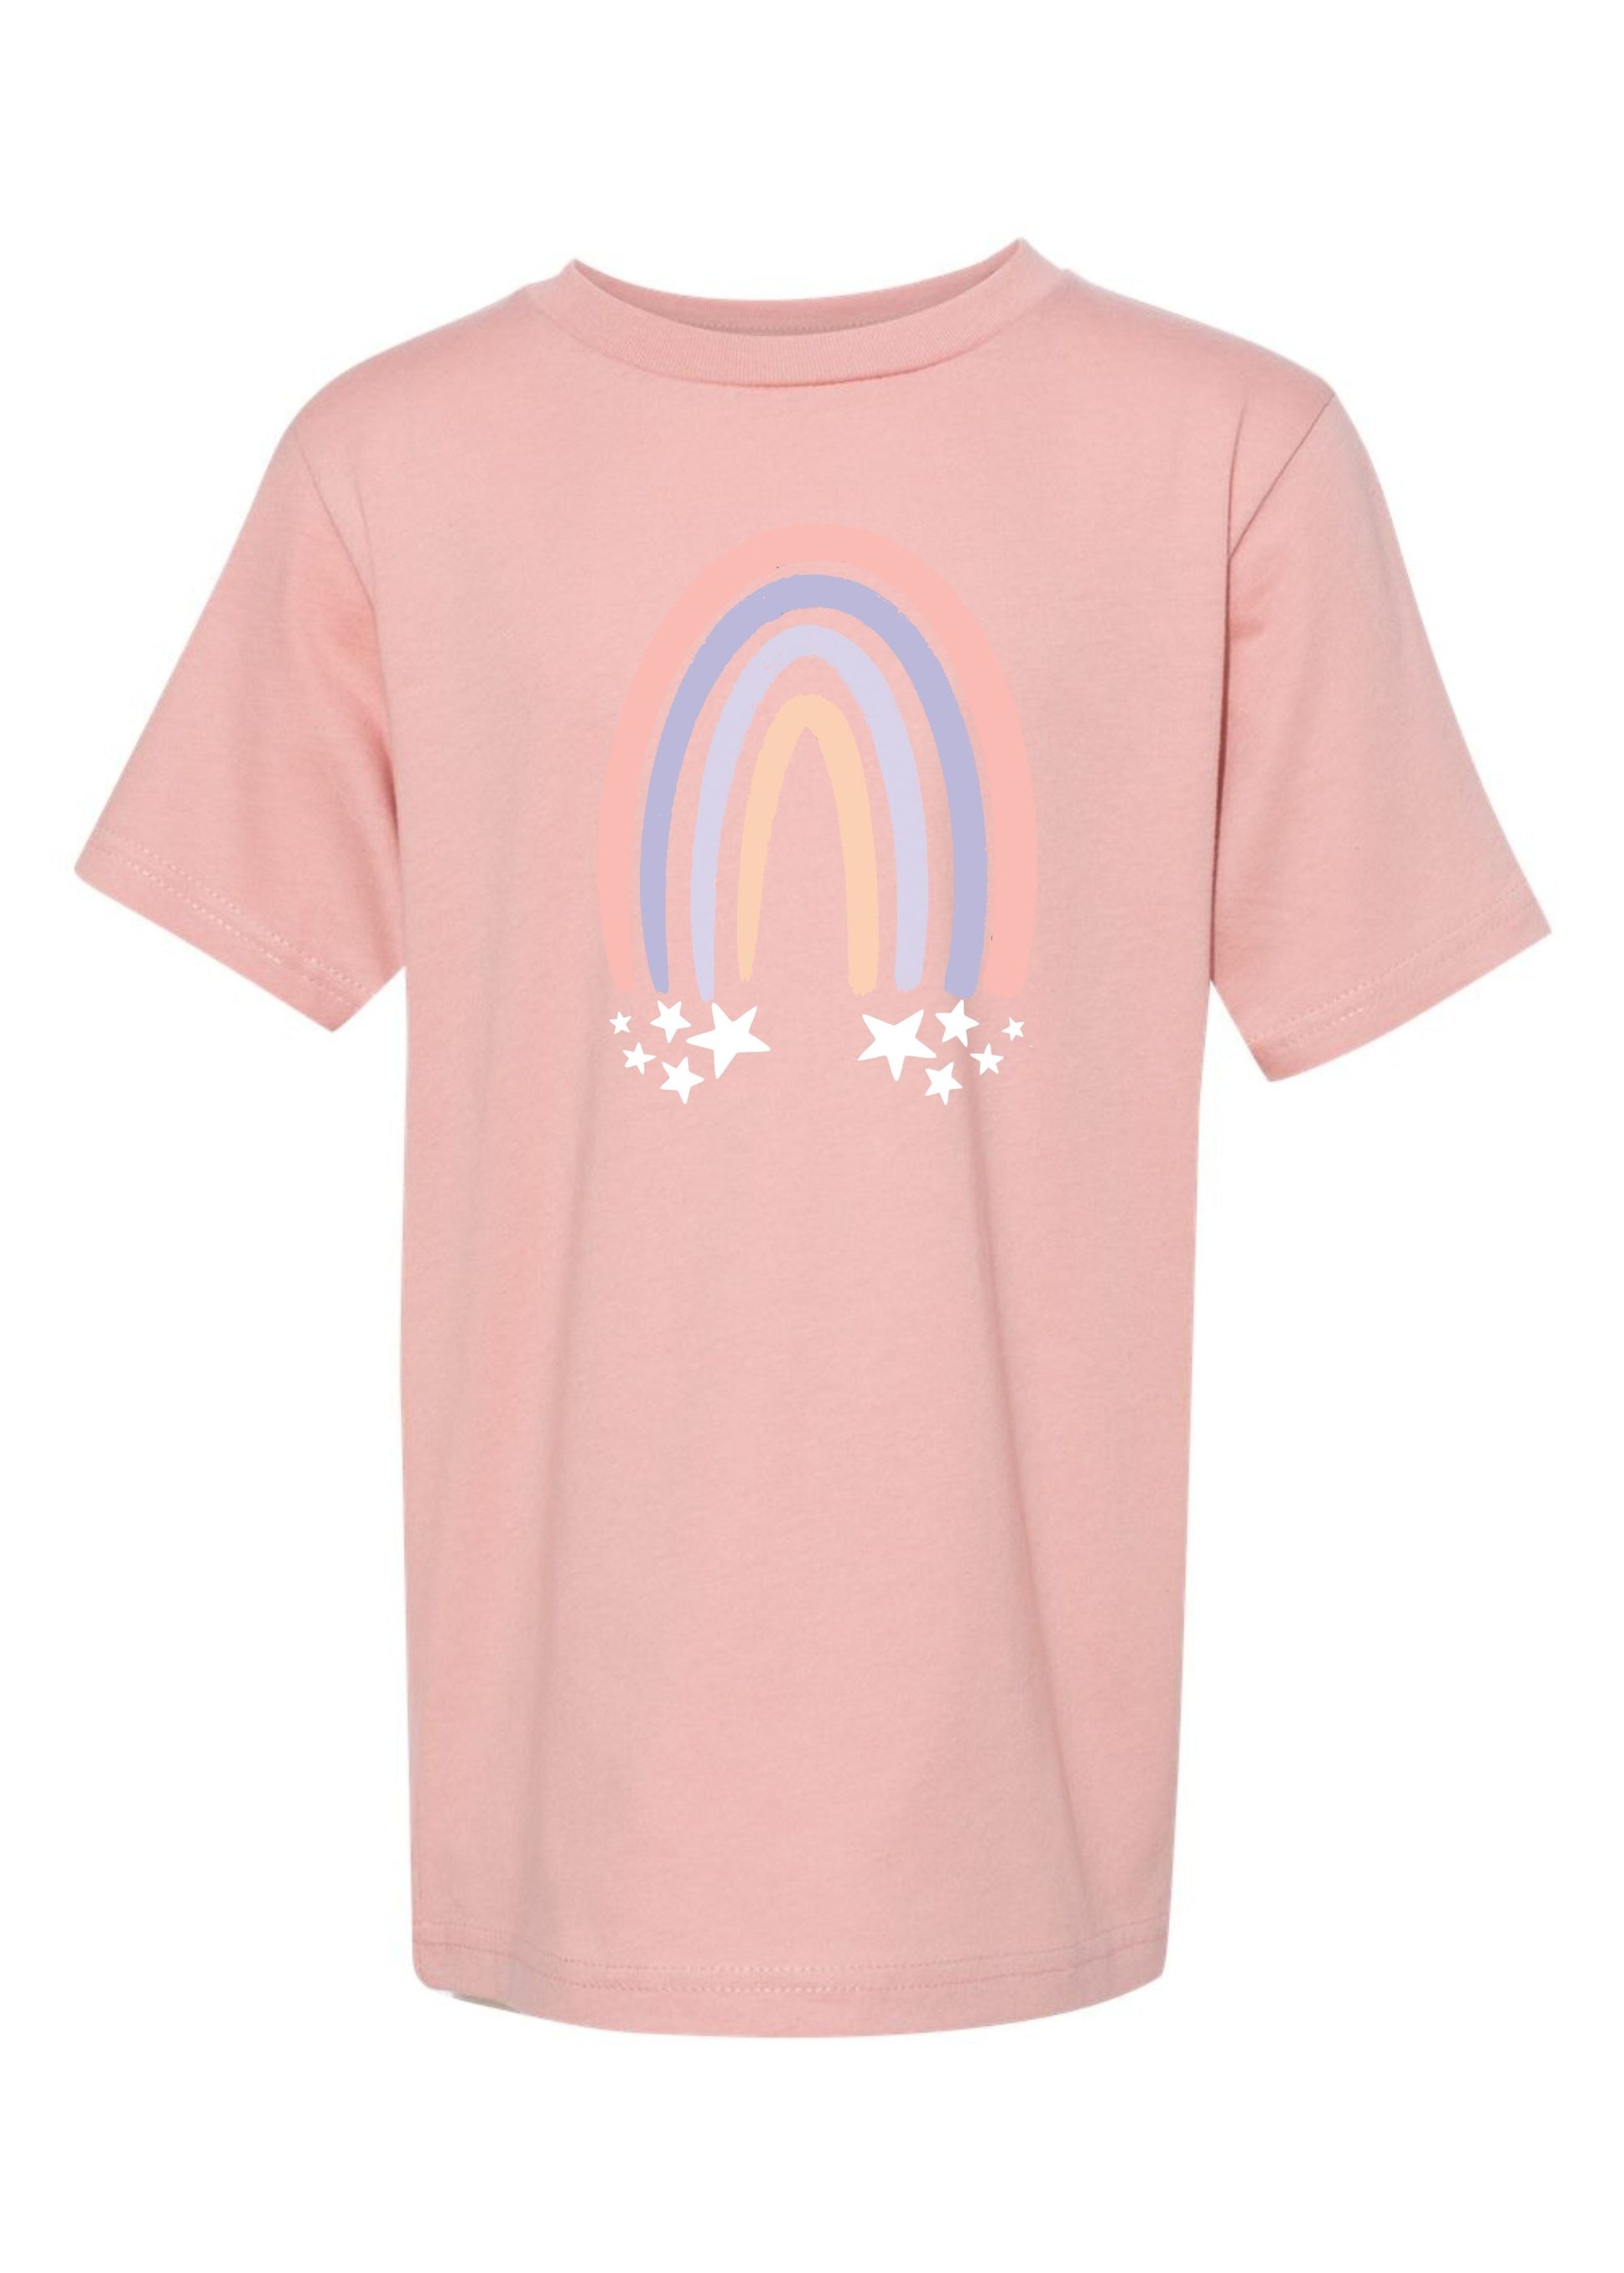 Girly Rainbow | Girl's Tee-Sister Shirts-Sister Shirts, Cute & Custom Tees for Mama & Littles in Trussville, Alabama.